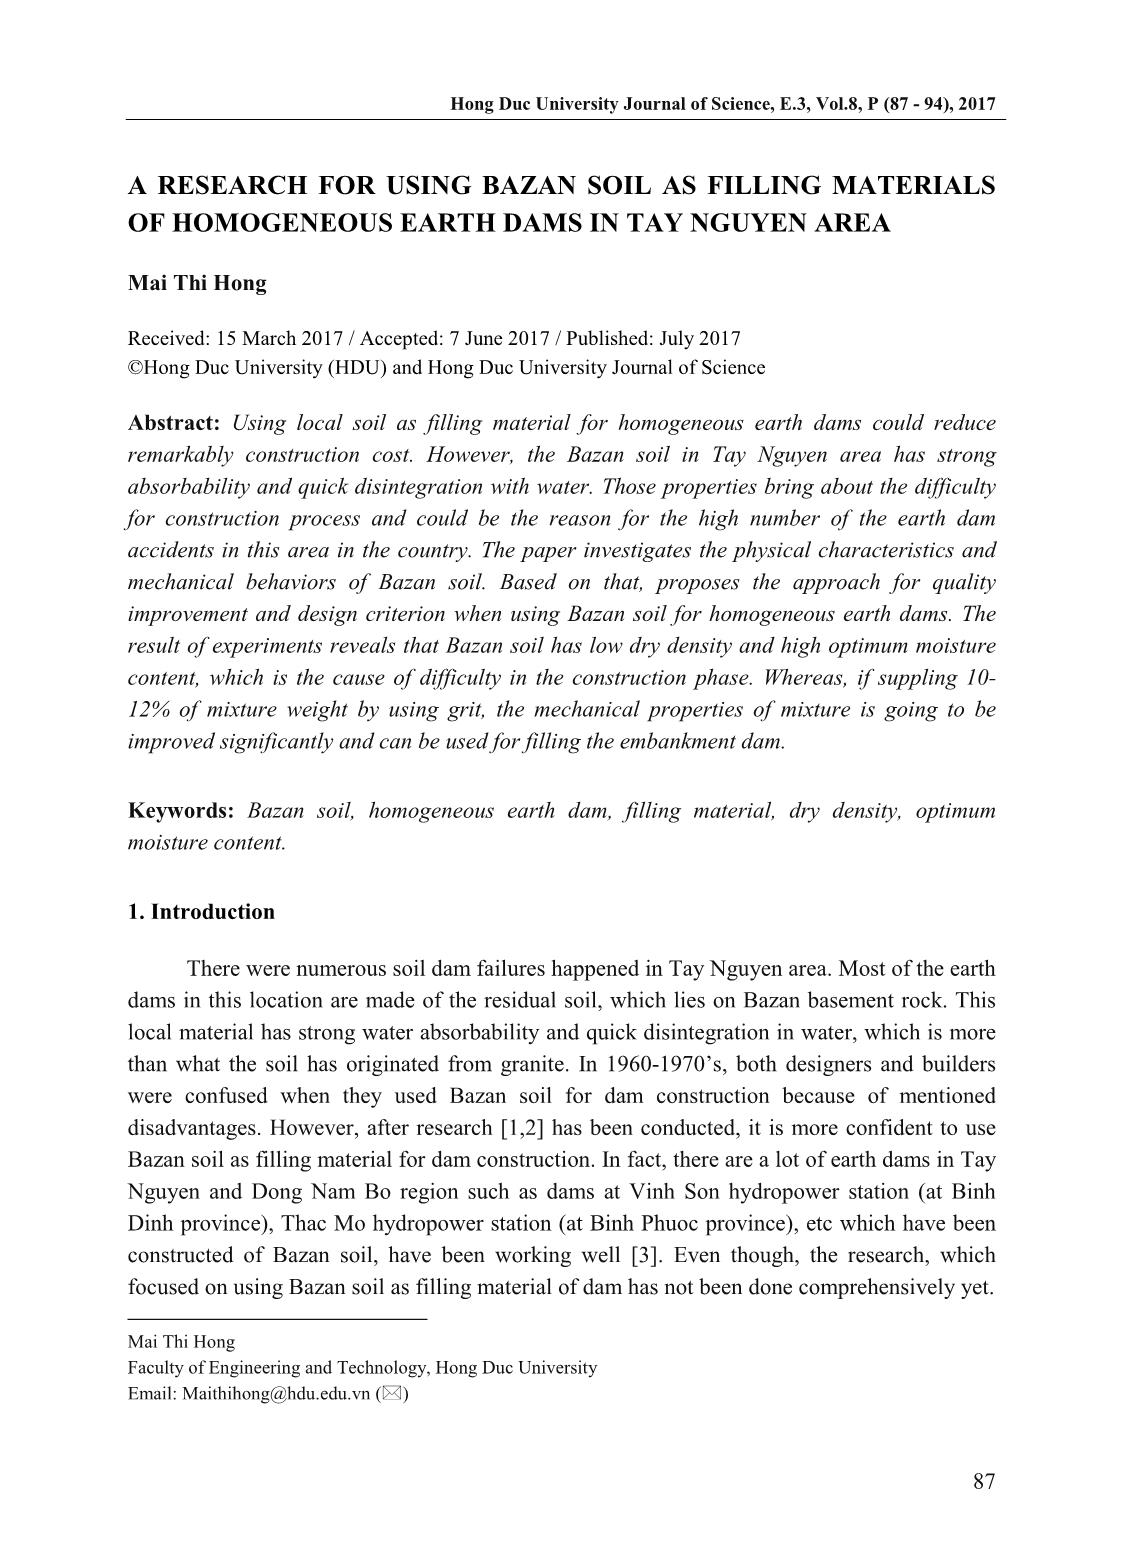 A research for using bazan soil as filling materials of homogeneous earth dams in Tay Nguyen area trang 1